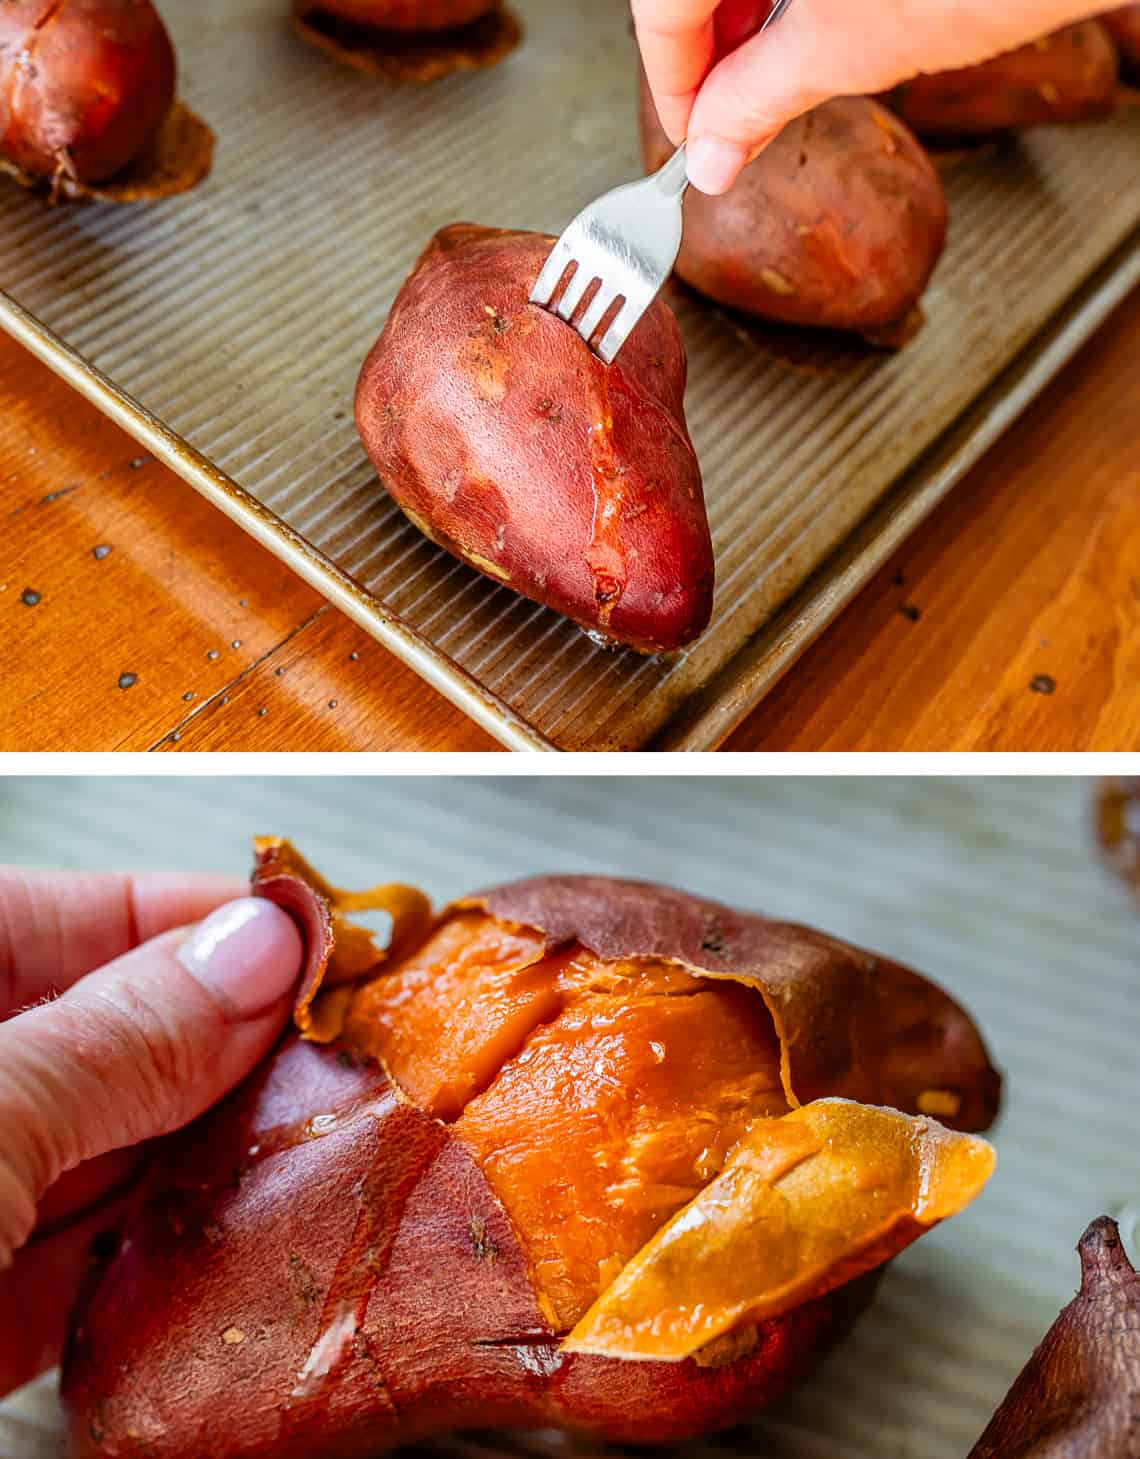 fork testing a sweet potato to see if it's cooked through, peeling the skin off a cooked potato.